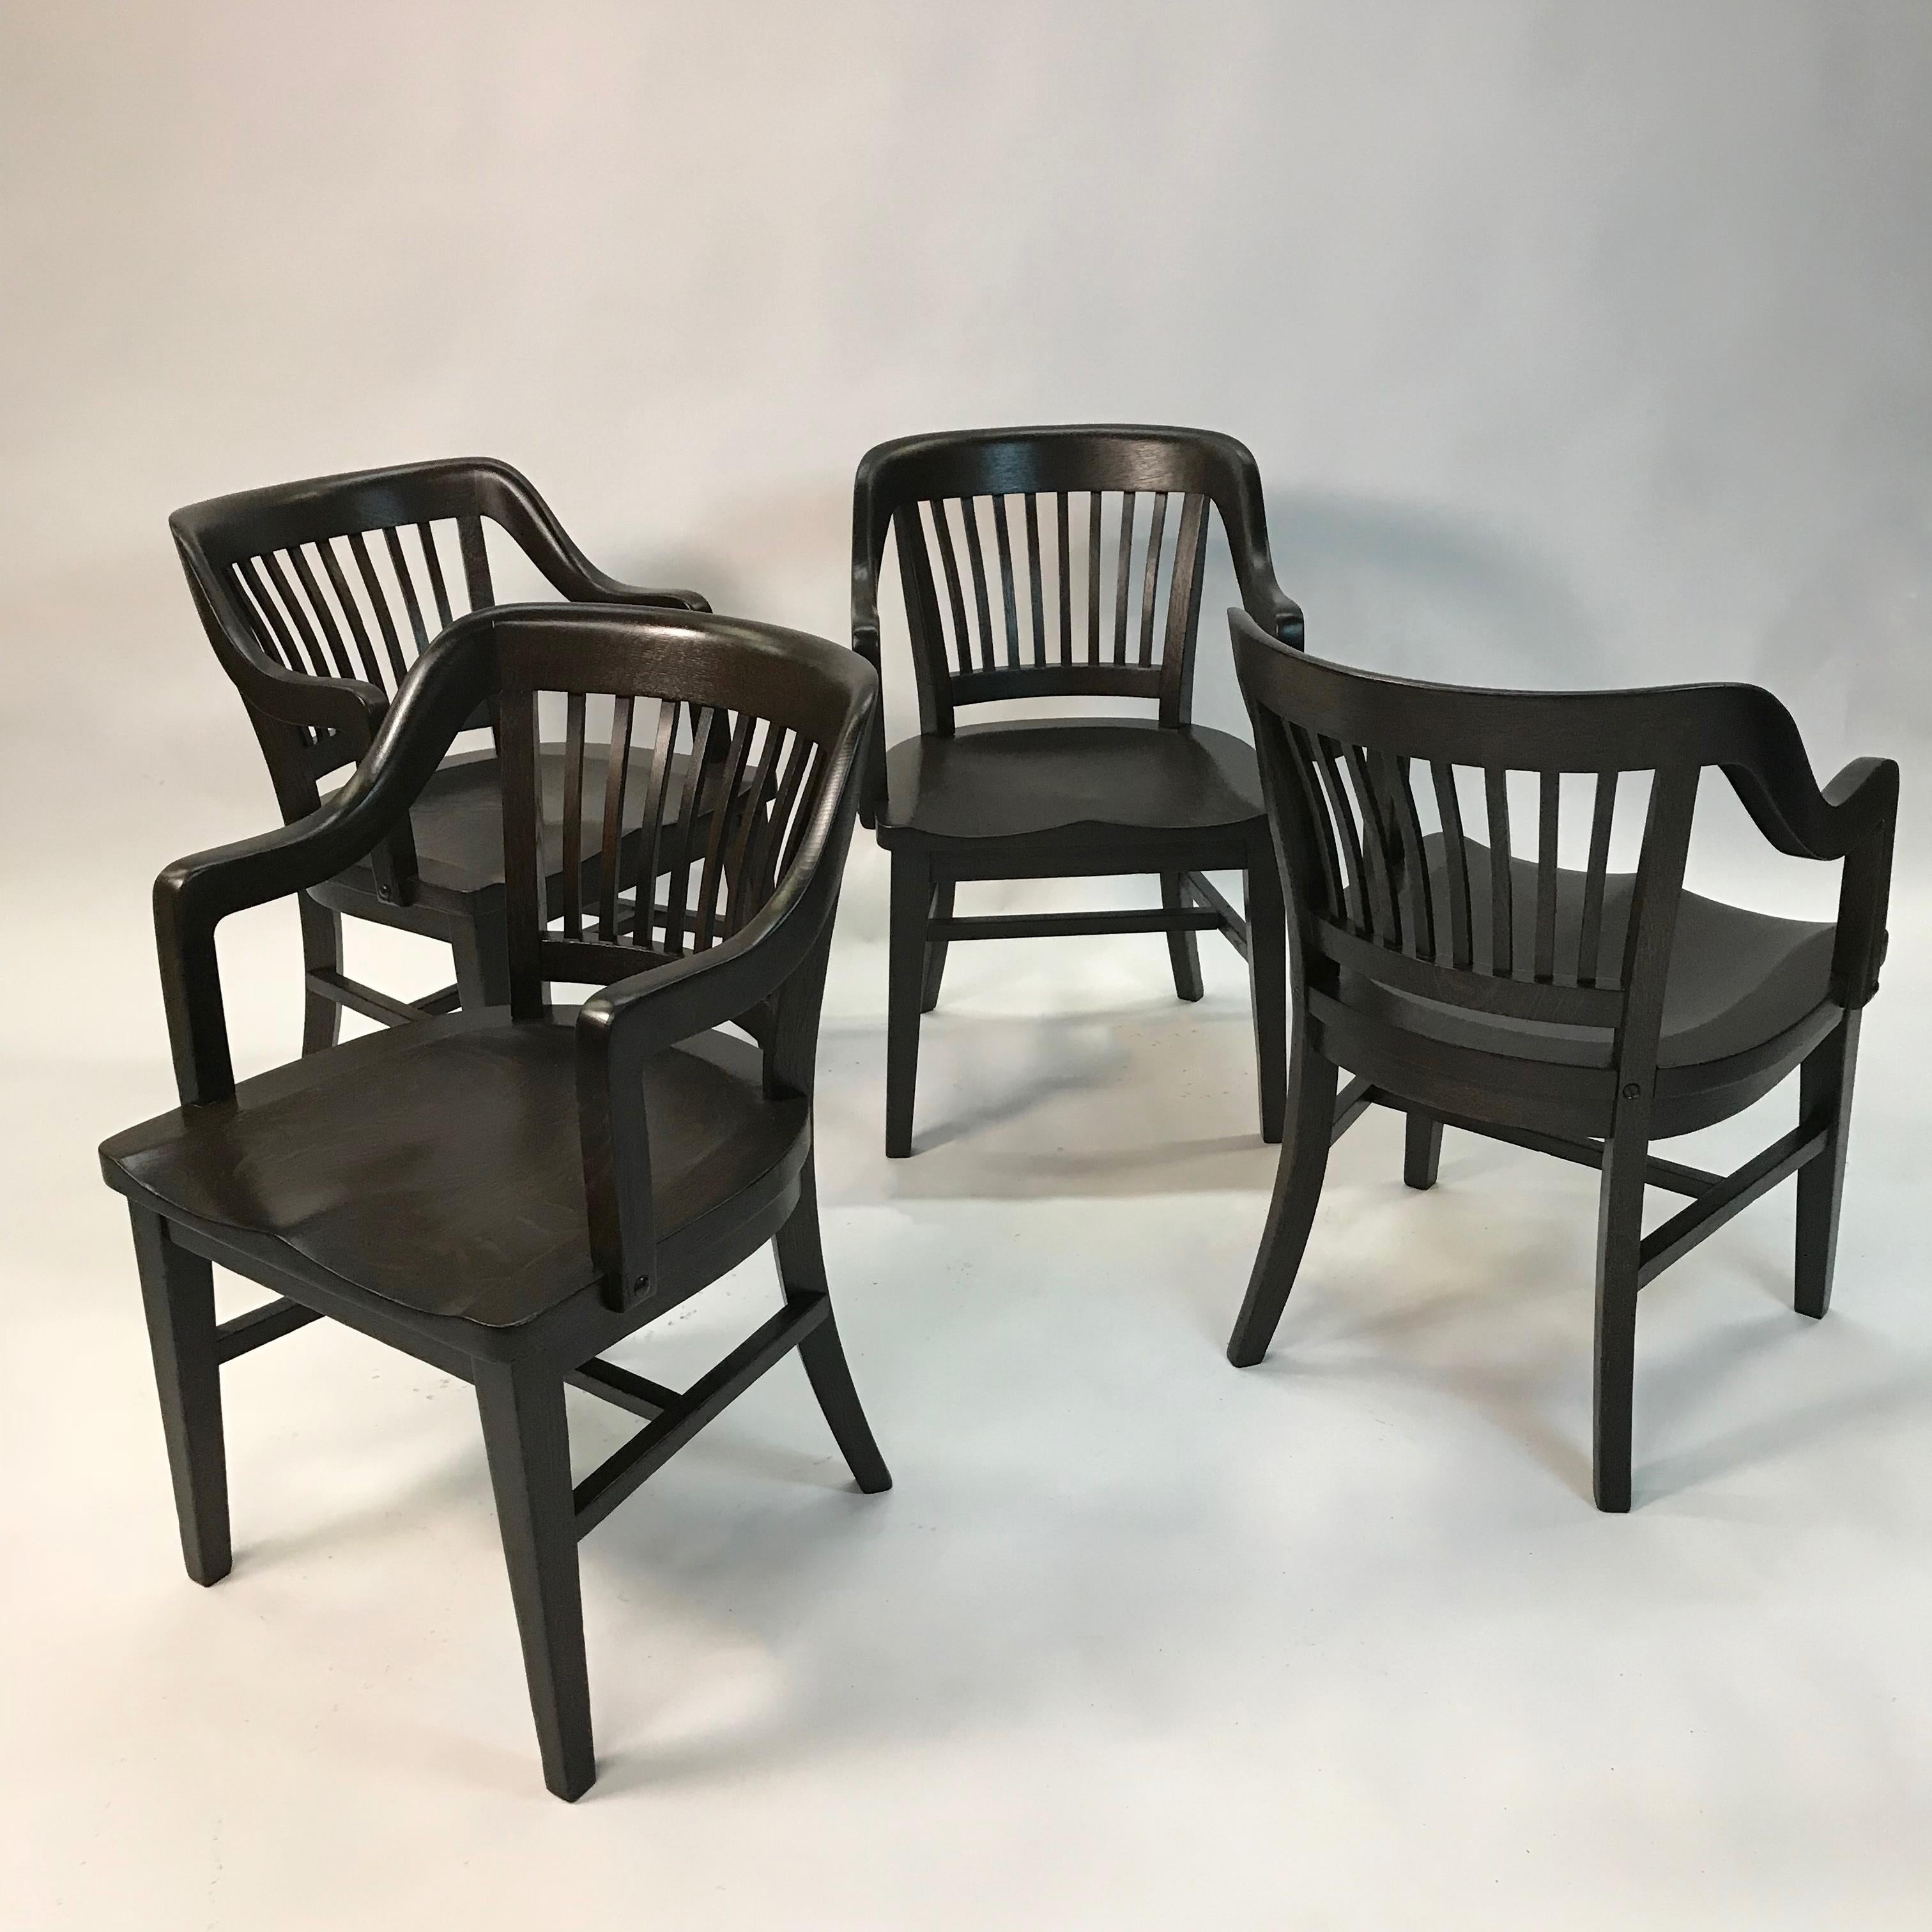 Handsome set of 4, midcentury, ebonized maple, bank of England, courthouse, juror armchairs feature molded seats and an arm height of 27 inches. The chairs are interesting as they sport a more boxy frame than the typical bank chair.